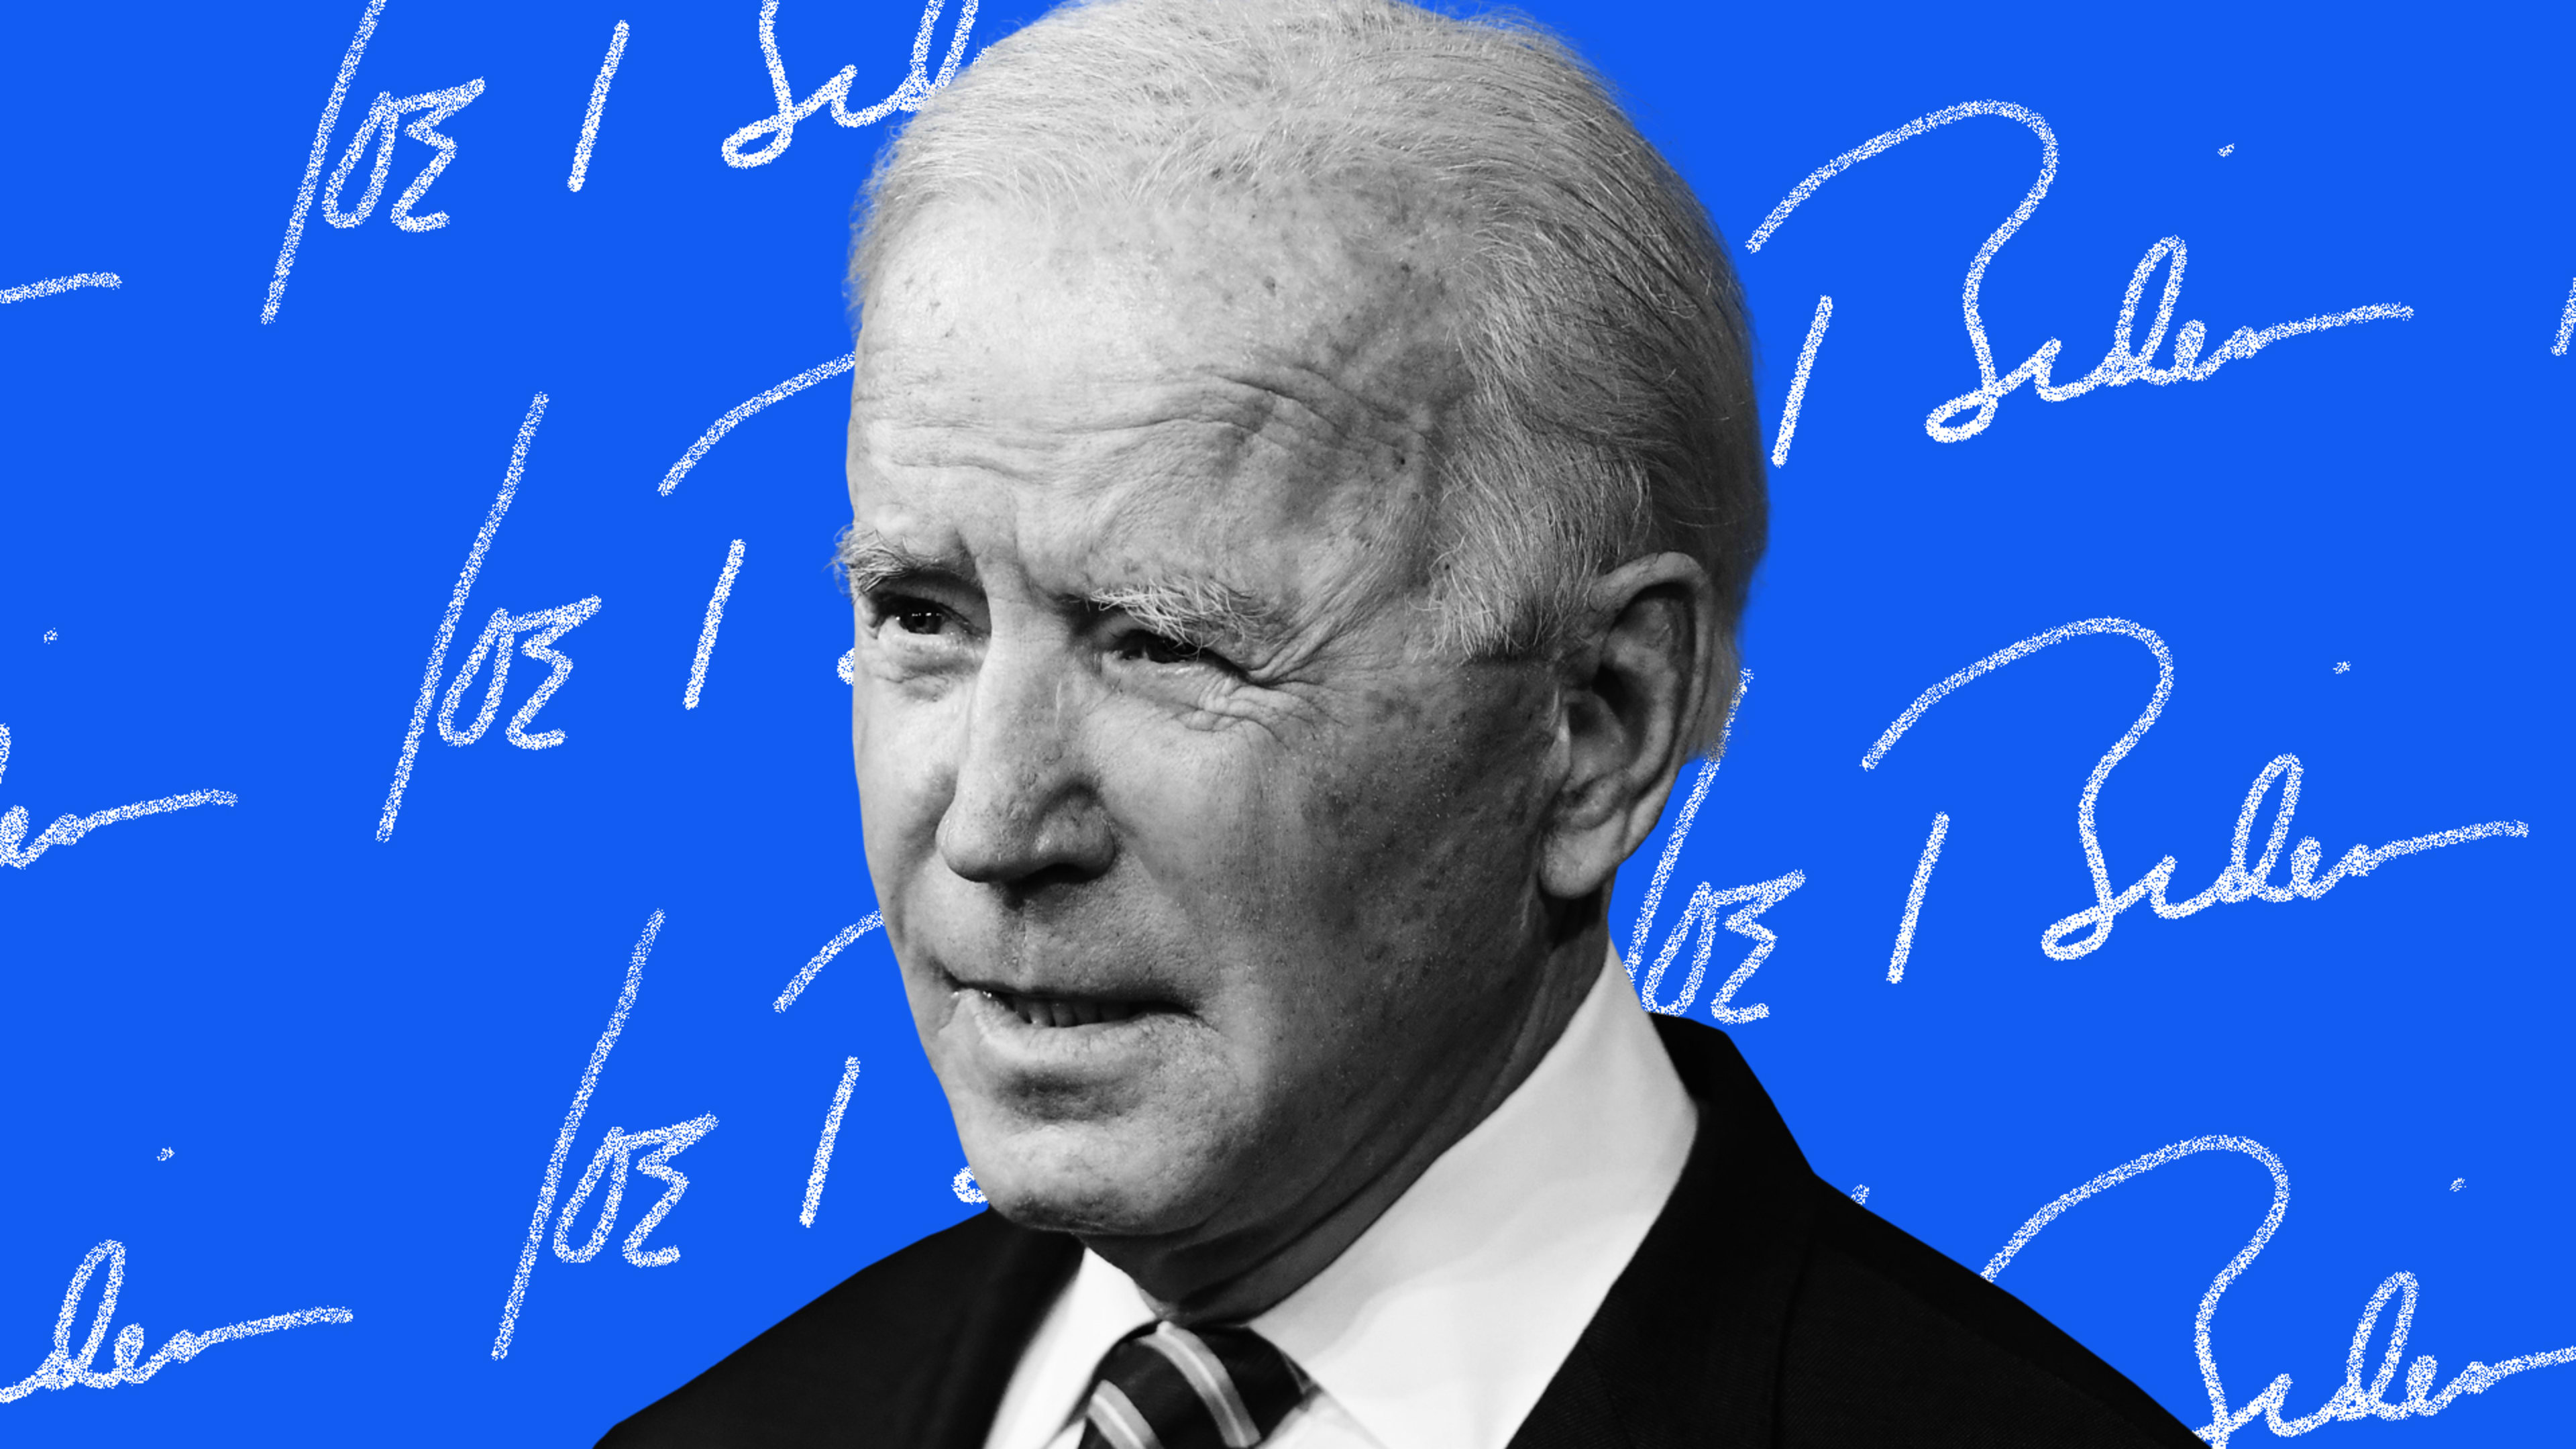 Joe Biden is the president. Here are some executive actions he is expected to take